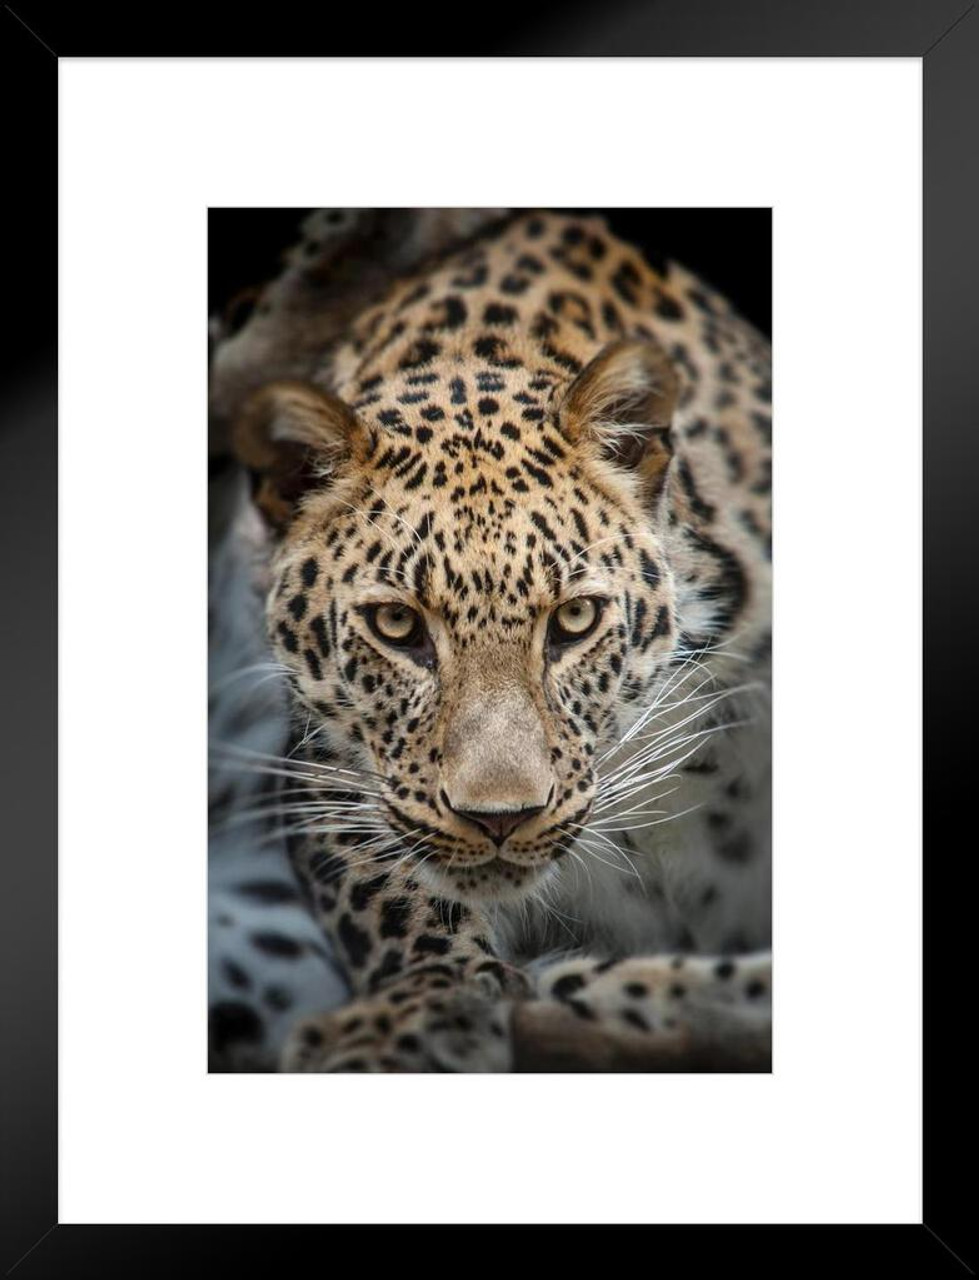 Close Up of Angry Leopard Photo Leopard Pictures Wall Decor Jungle Animal  Pictures for Wall Posters of Wild Animals Jungle Leopard Print Decor Animal  Wall Decor Matted Framed Art Wall Decor 20x26 